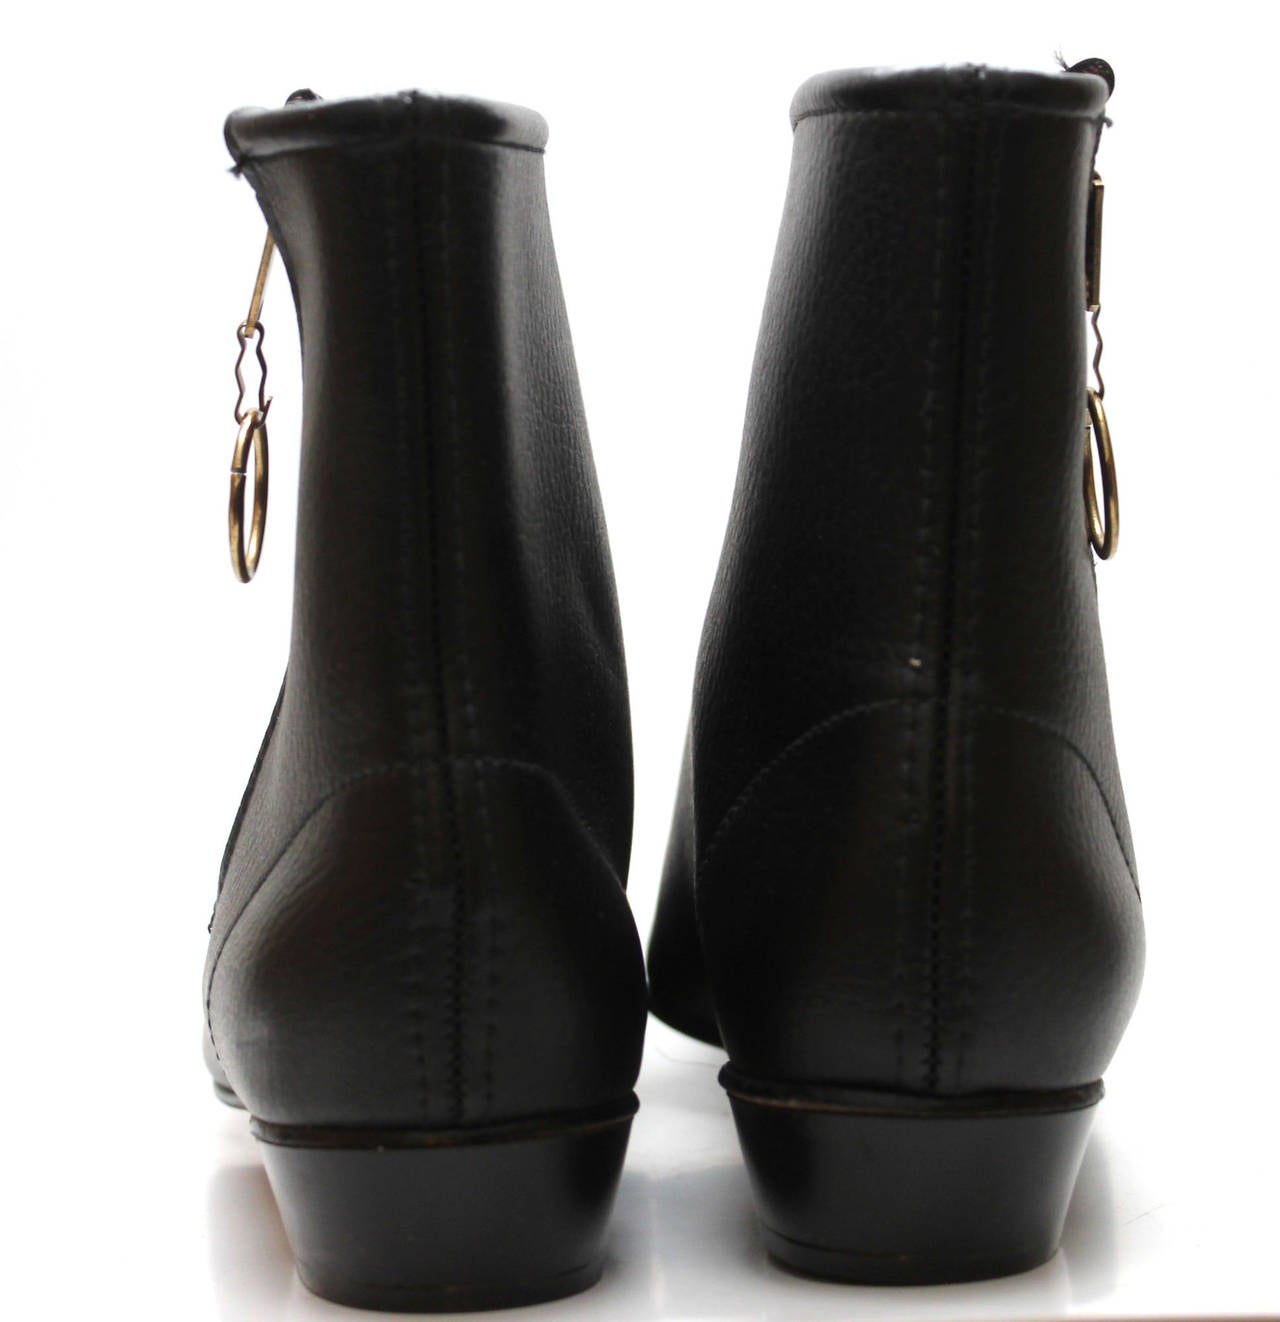 Rare 1960s Black Go Go Boots For Sale at 1stdibs